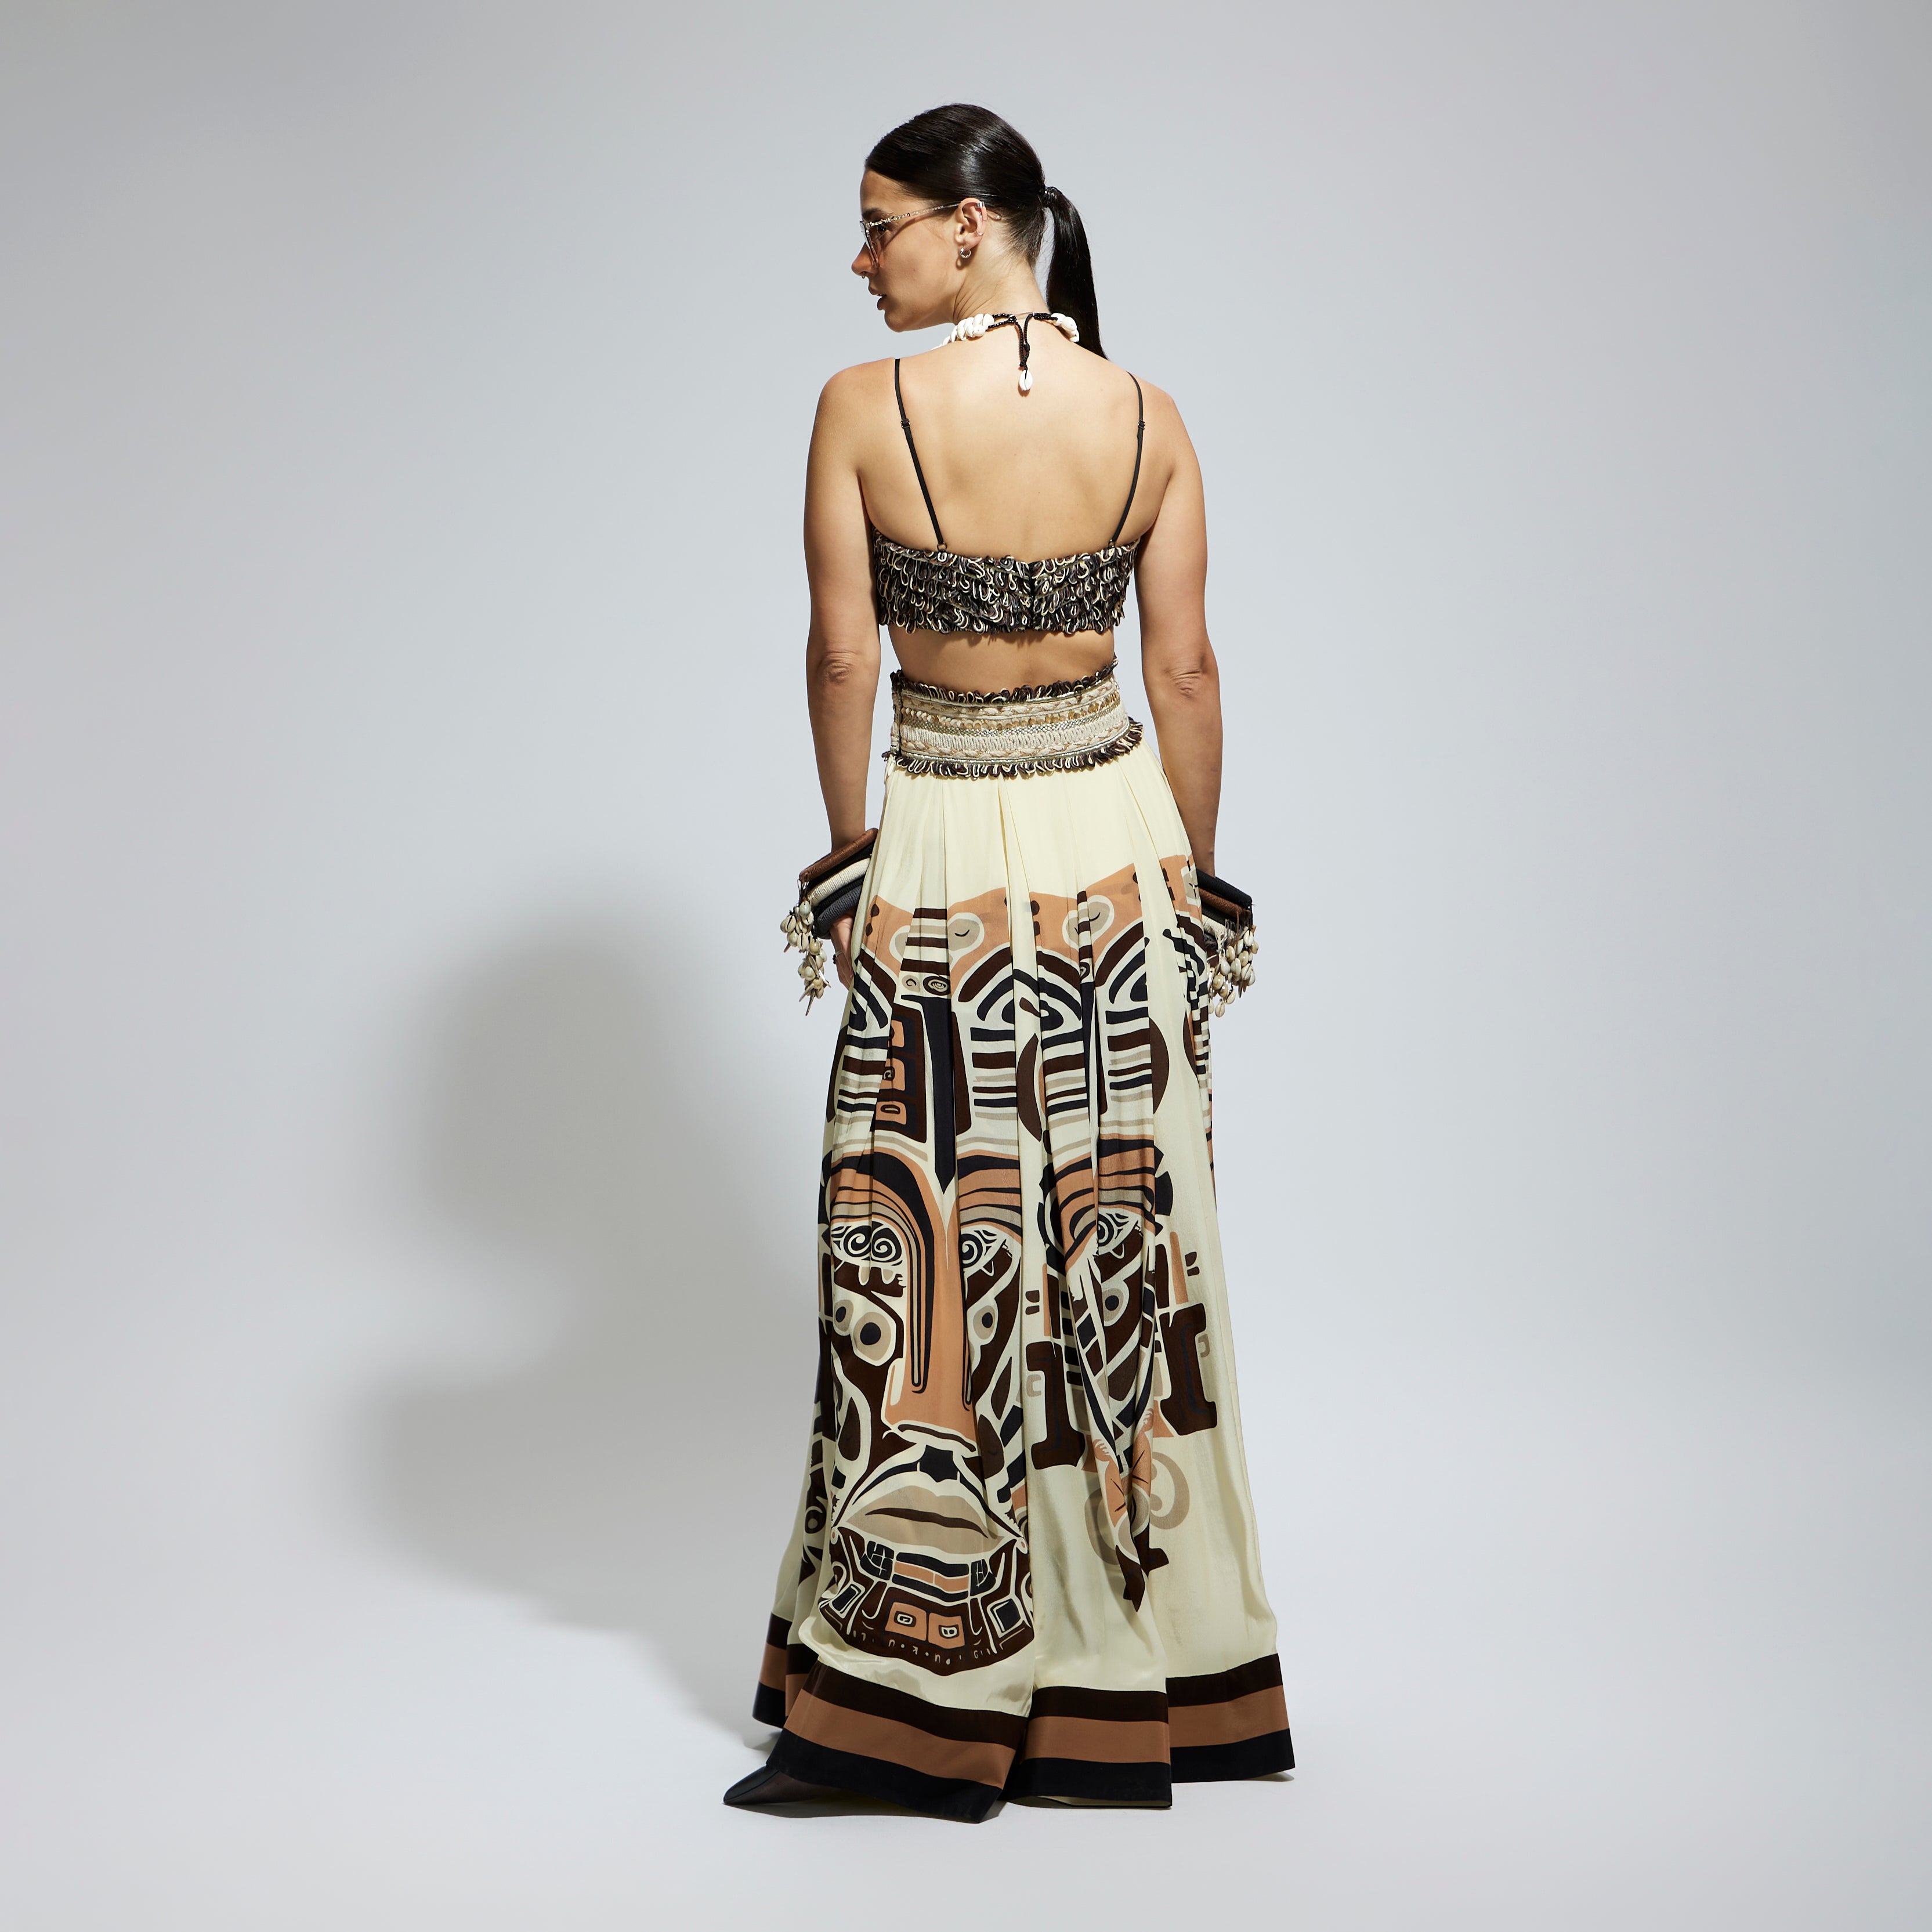 IVORY MASK PRINTED BOX PLEATED SKIRT WITH POCKETS TEAMED WITH A TEXTURED BUSTIER